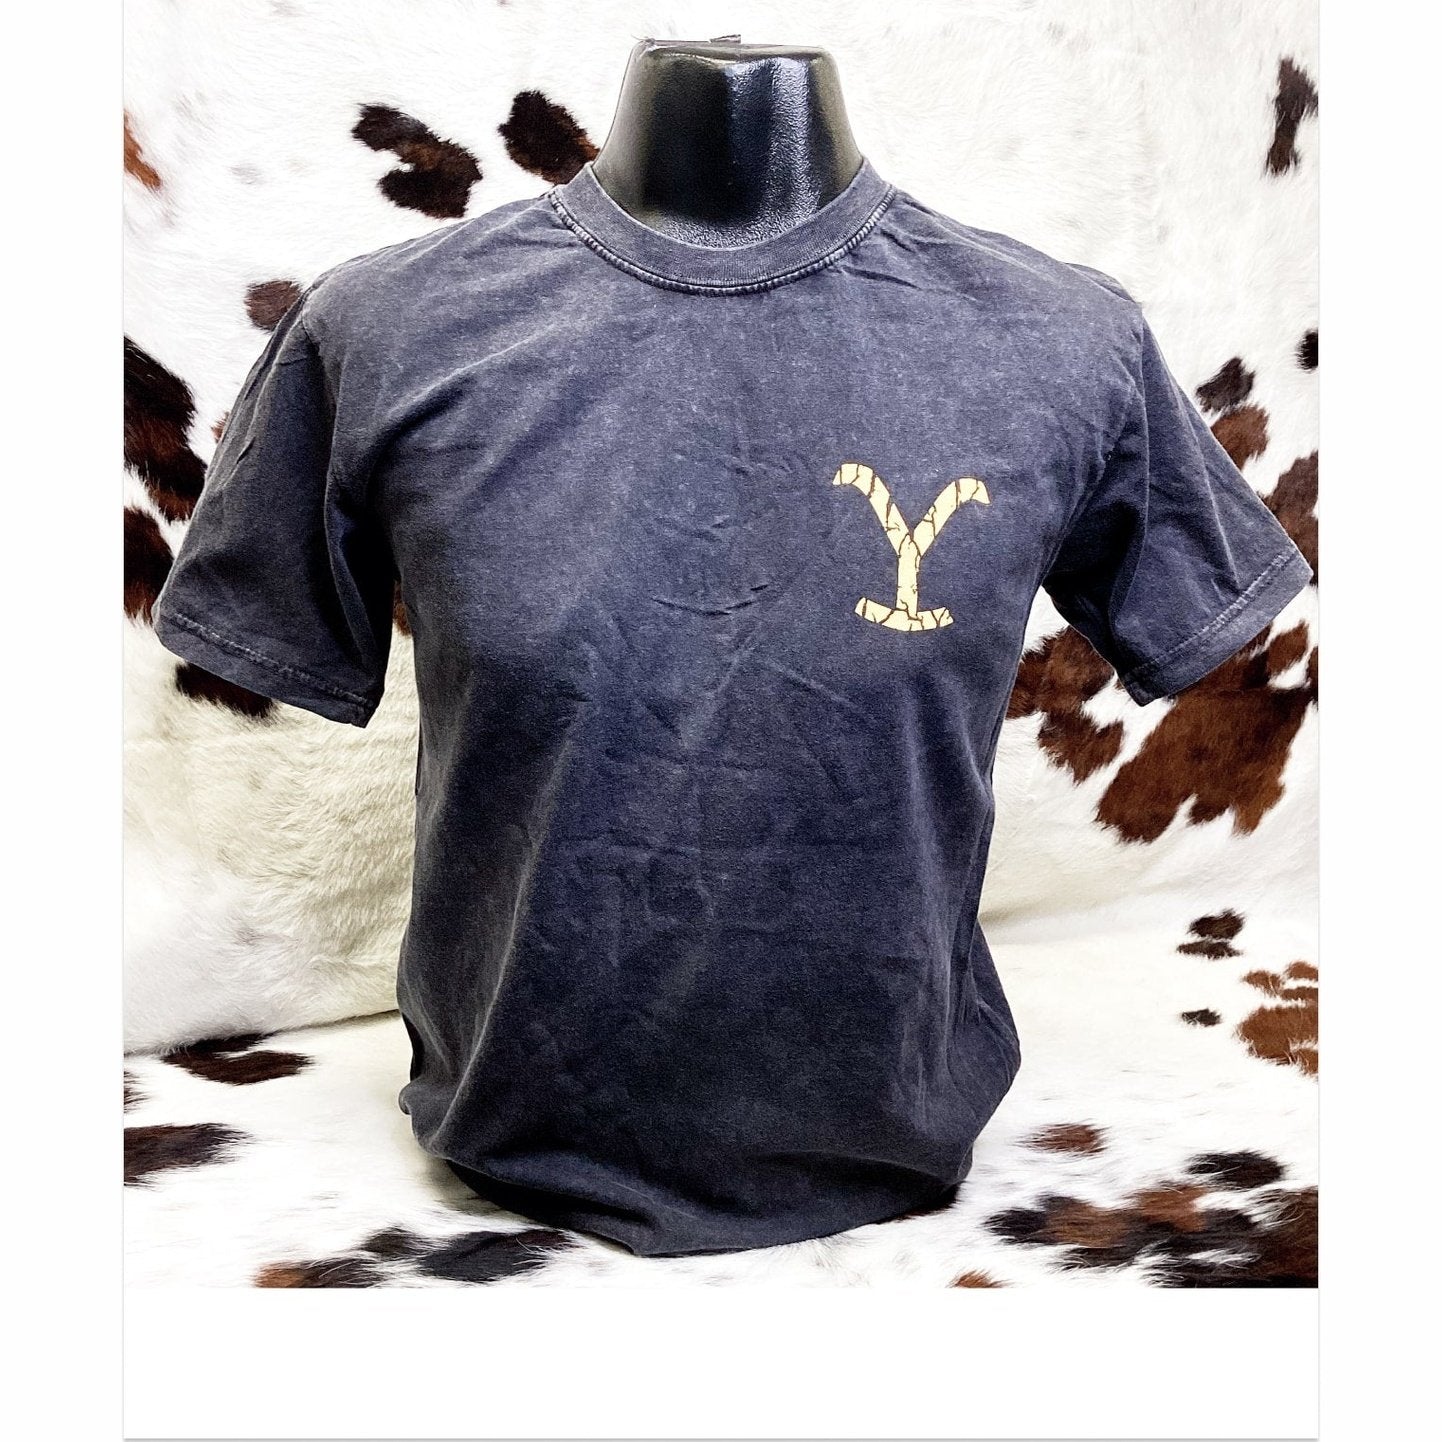 Changes Licensed Yellowstone Men’s T-Shirt Grey Dutton Ranch 66-561-104 - Changes Licensed Apparel